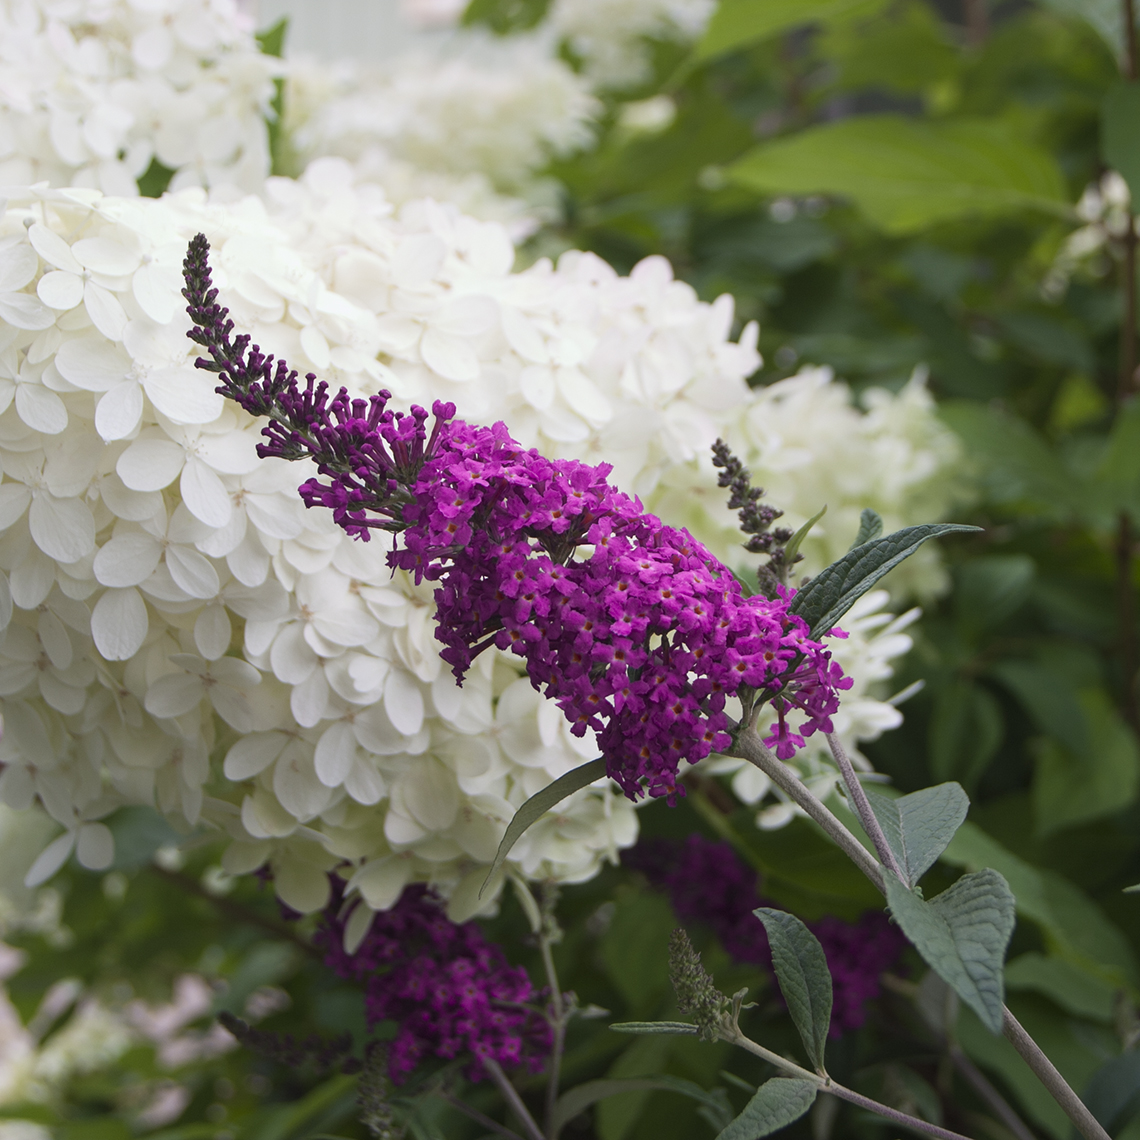 Close up of a magenta Miss Ruby flower against a white Hydrangea bloom